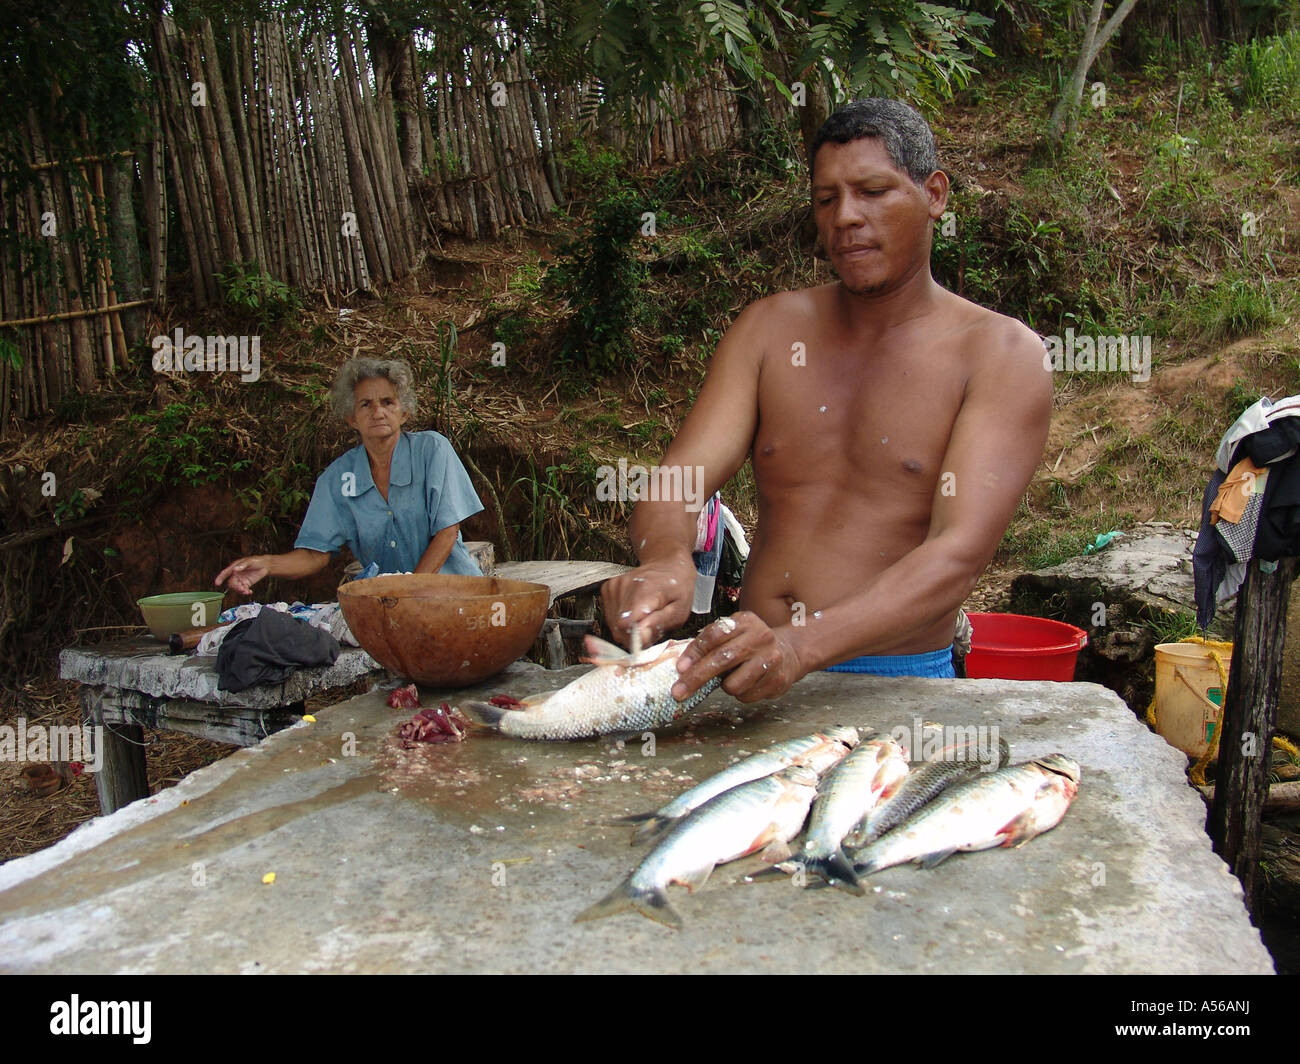 Painet iy8228 colombia fisherman cleaning fish rio magdalena barrancabermeja photo 2005 country developing nation less Stock Photo